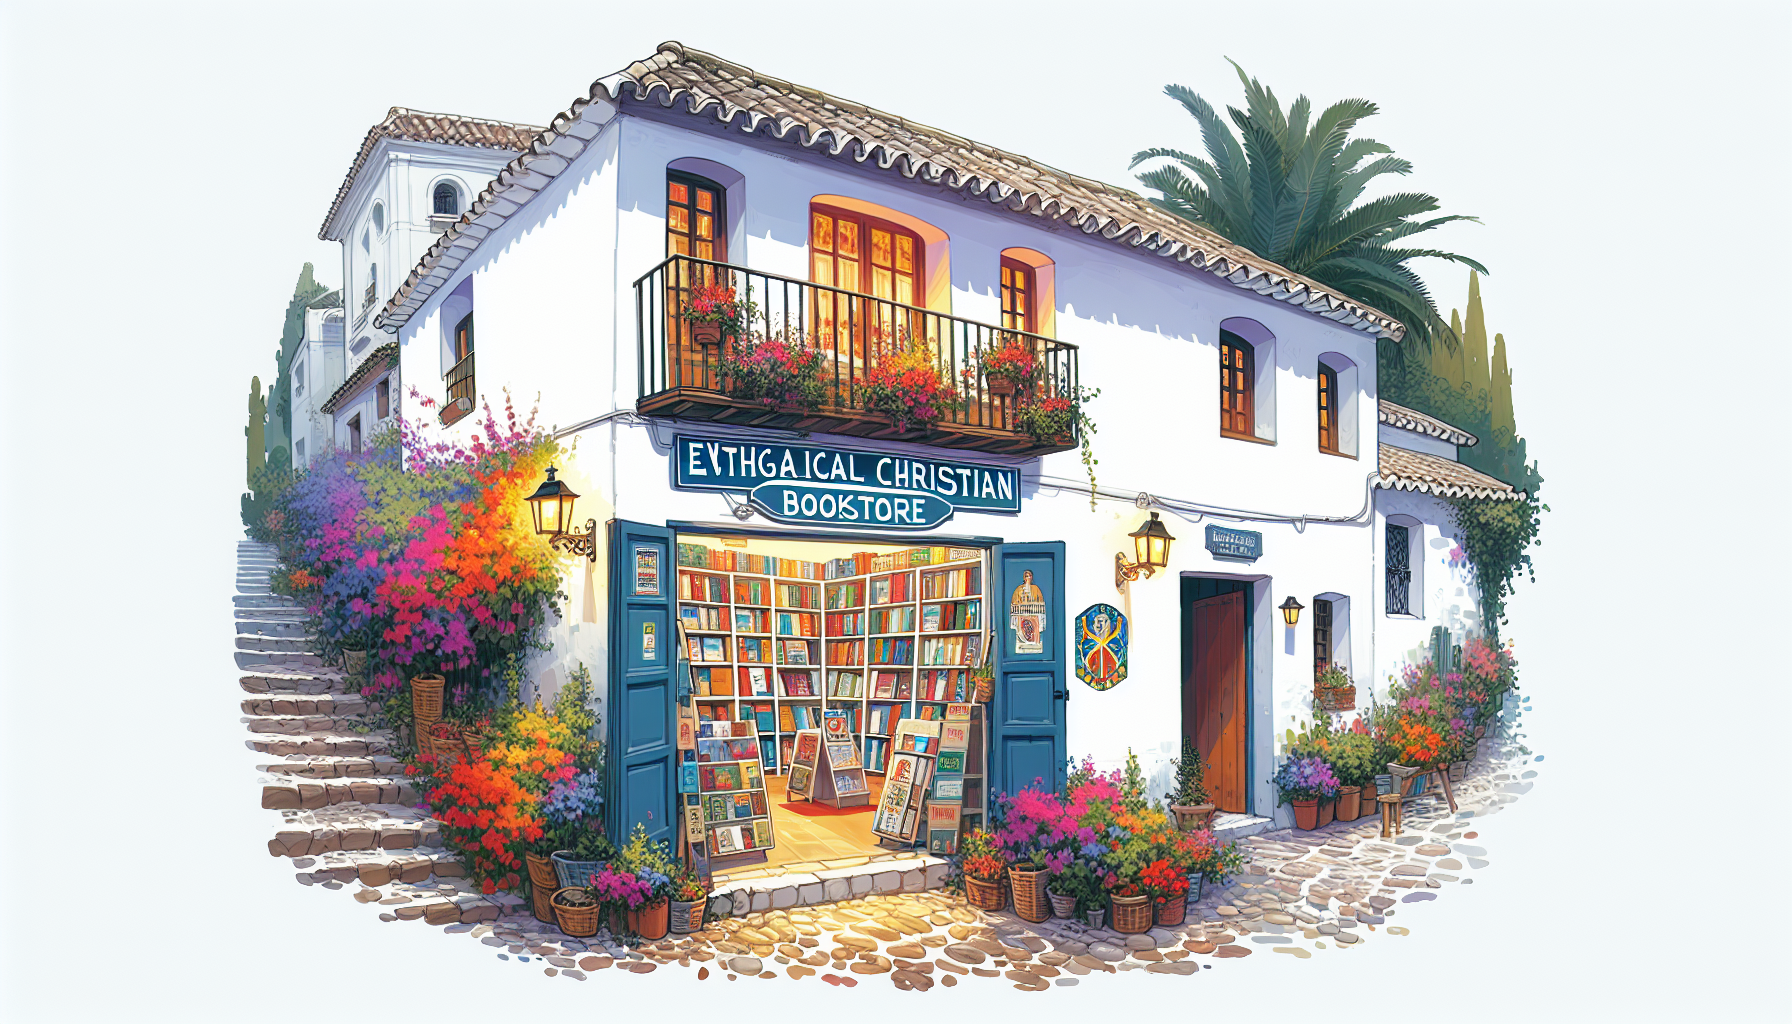 Cozy evangelical Christian bookstore in a traditional Spanish village, with whitewashed walls and bright flowers, shelves stocked with Bibles and religious literature, and a welcoming open door